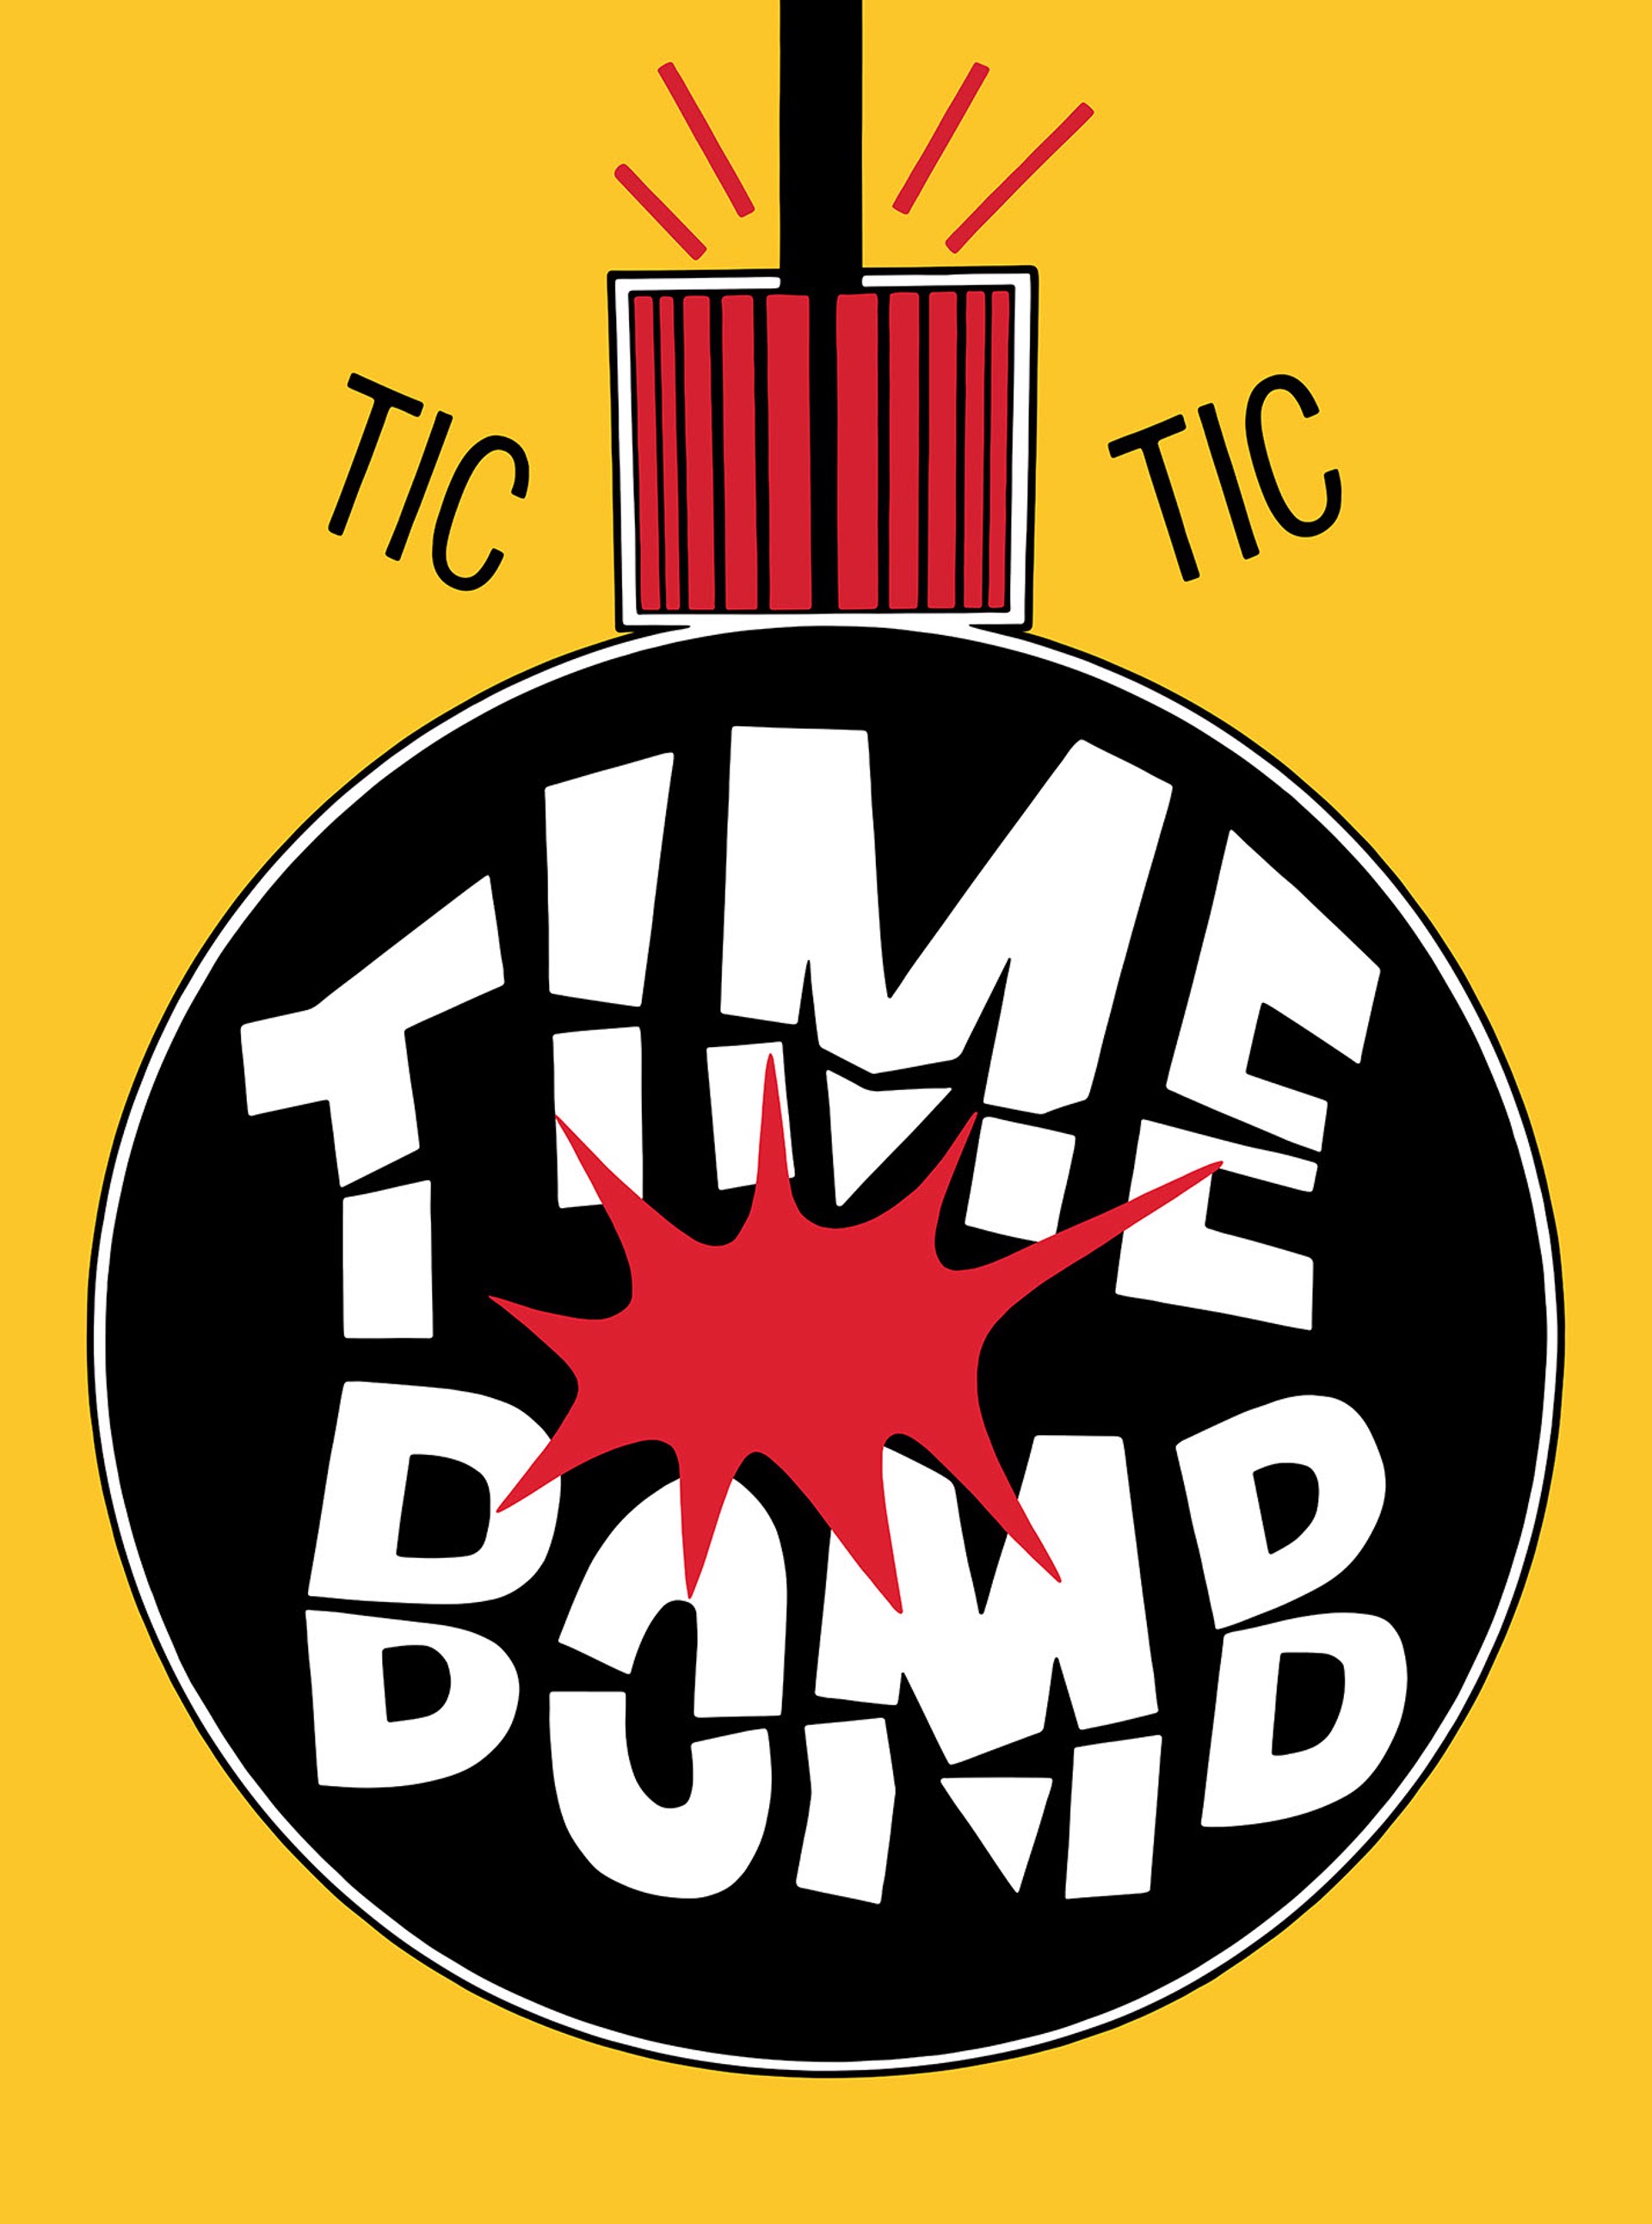 Ticking Time Bomb by Mark Hosford